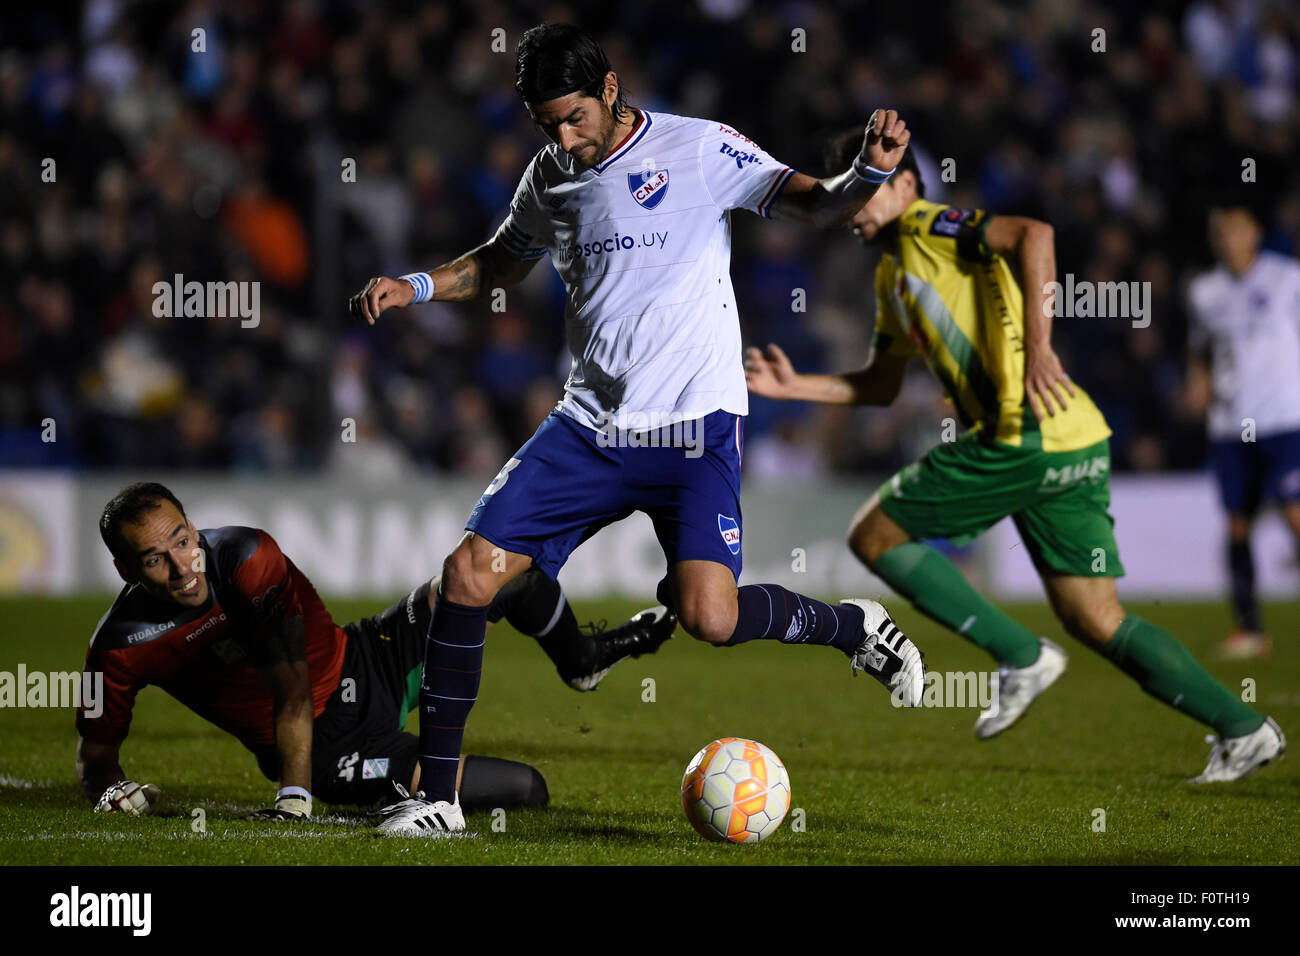 Montevideo, Uruguay. 20th Aug, 2015. Sebastian Abreu (C) of Uruguay's Nacional vies with Marcos Arguello (L) of Bolivia's Oriente Petrolero during the second-leg match of the first phase of the South American Cup, in Montevideo, capital of Uruguay, on Aug. 20, 2015. The match ended with a 0-0 draw. Credit:  Nicolas Celaya/Xinhua/Alamy Live News Stock Photo